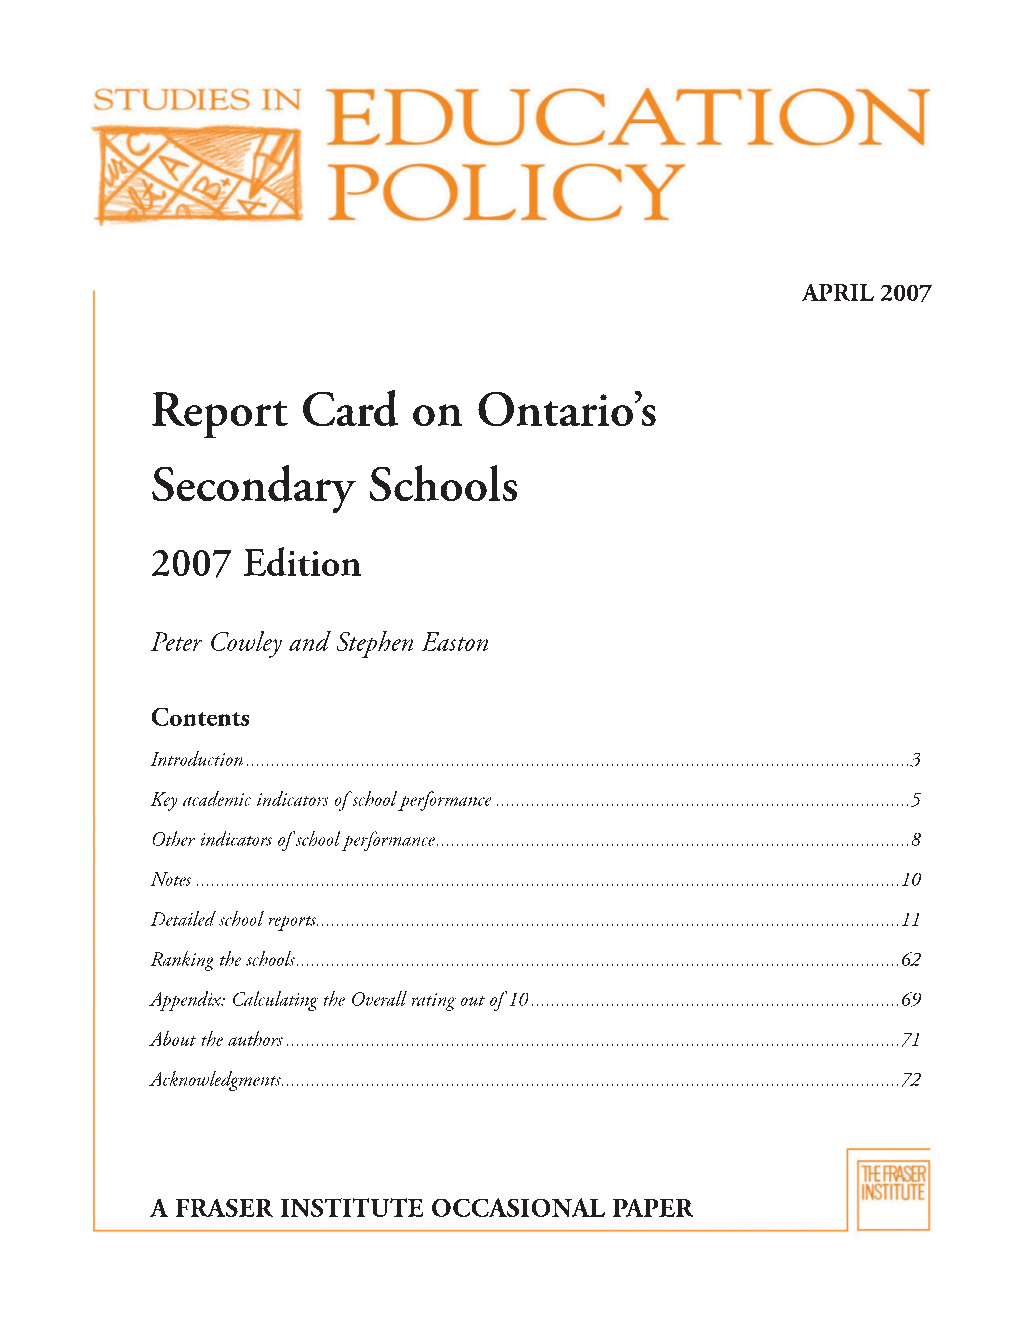 Report Card on Ontario's Secondary Schools: 2007 Edition